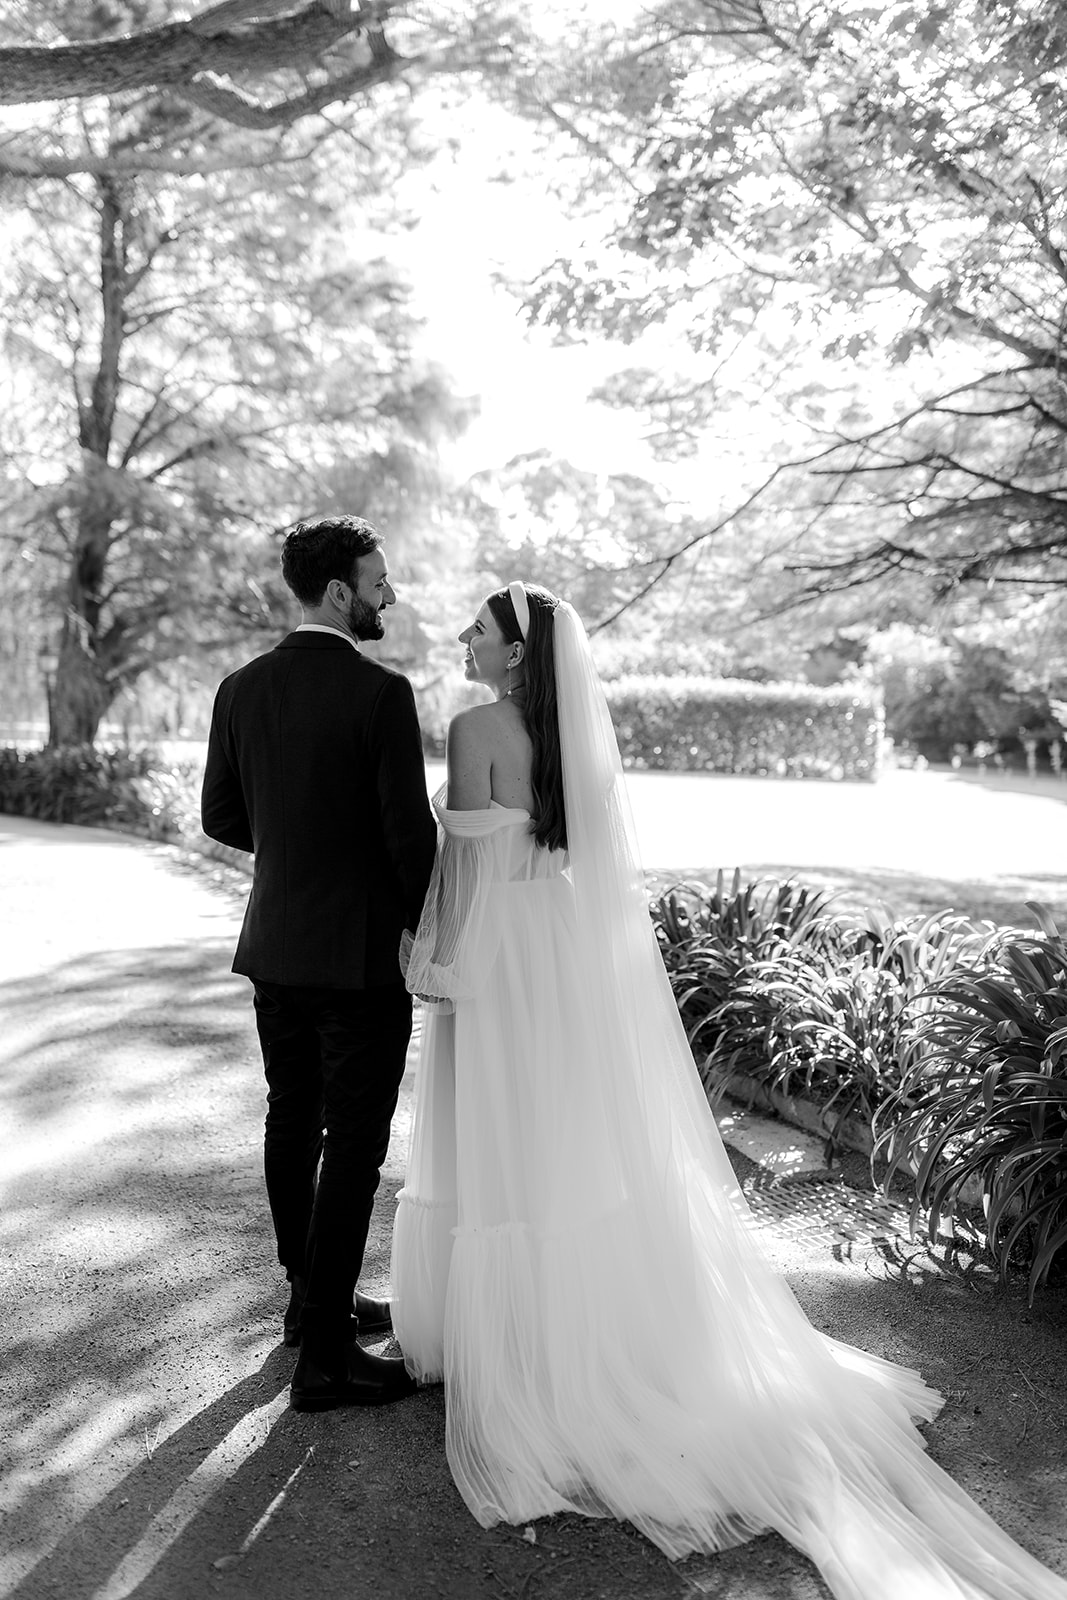 Portrait of bride & groom walking in an English-inspired garden during their elegant country wedding.